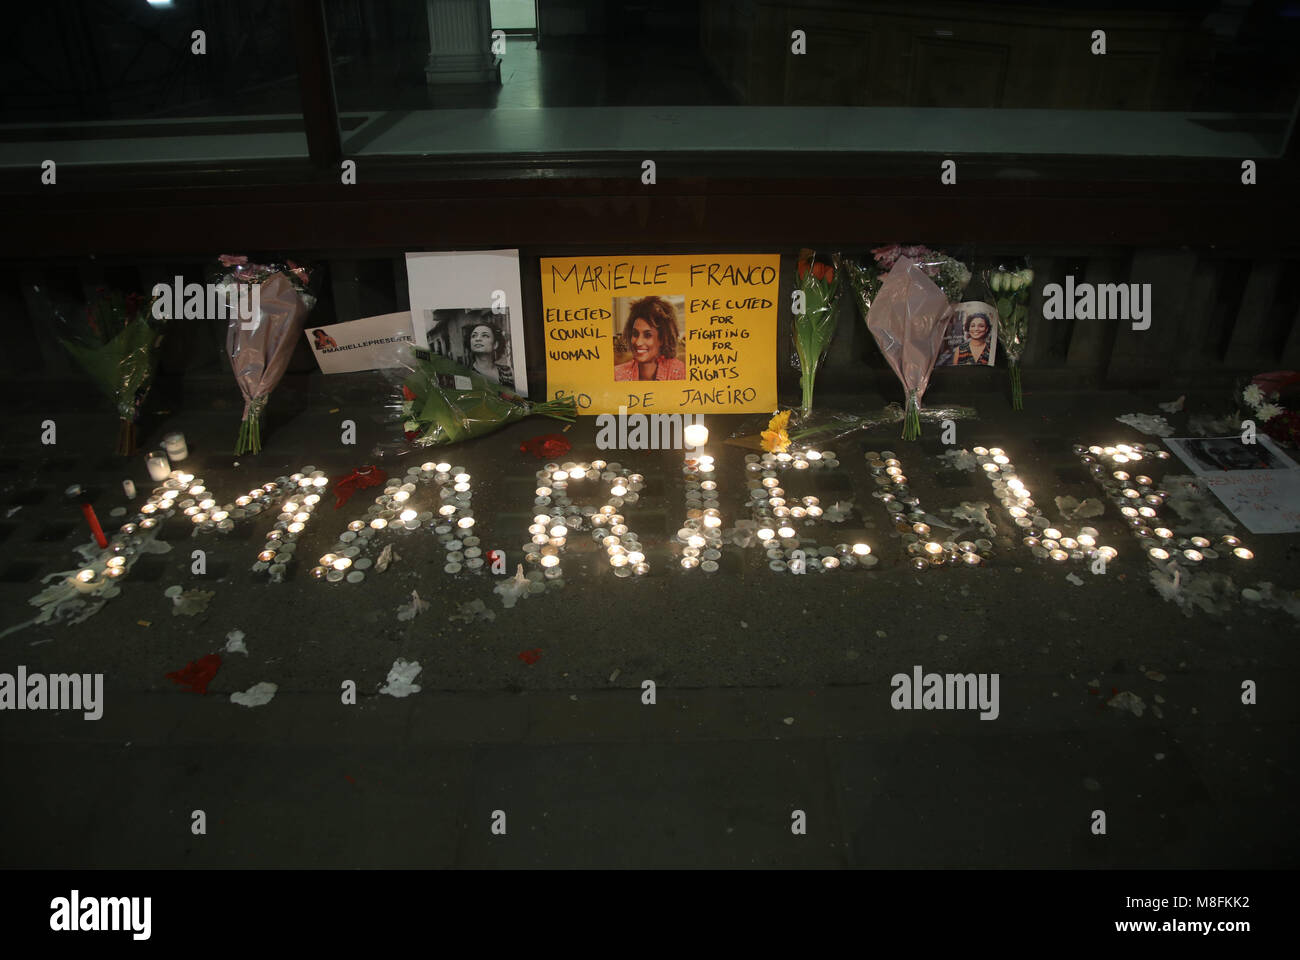 Tributes outside the Embassy of Brazil in London to Marielle Franco, 38, a Rio city councillor who was shot dead on Wednesday March 14 in downtown Rio de Janeiro, in an apparent targeted assassination. Stock Photo